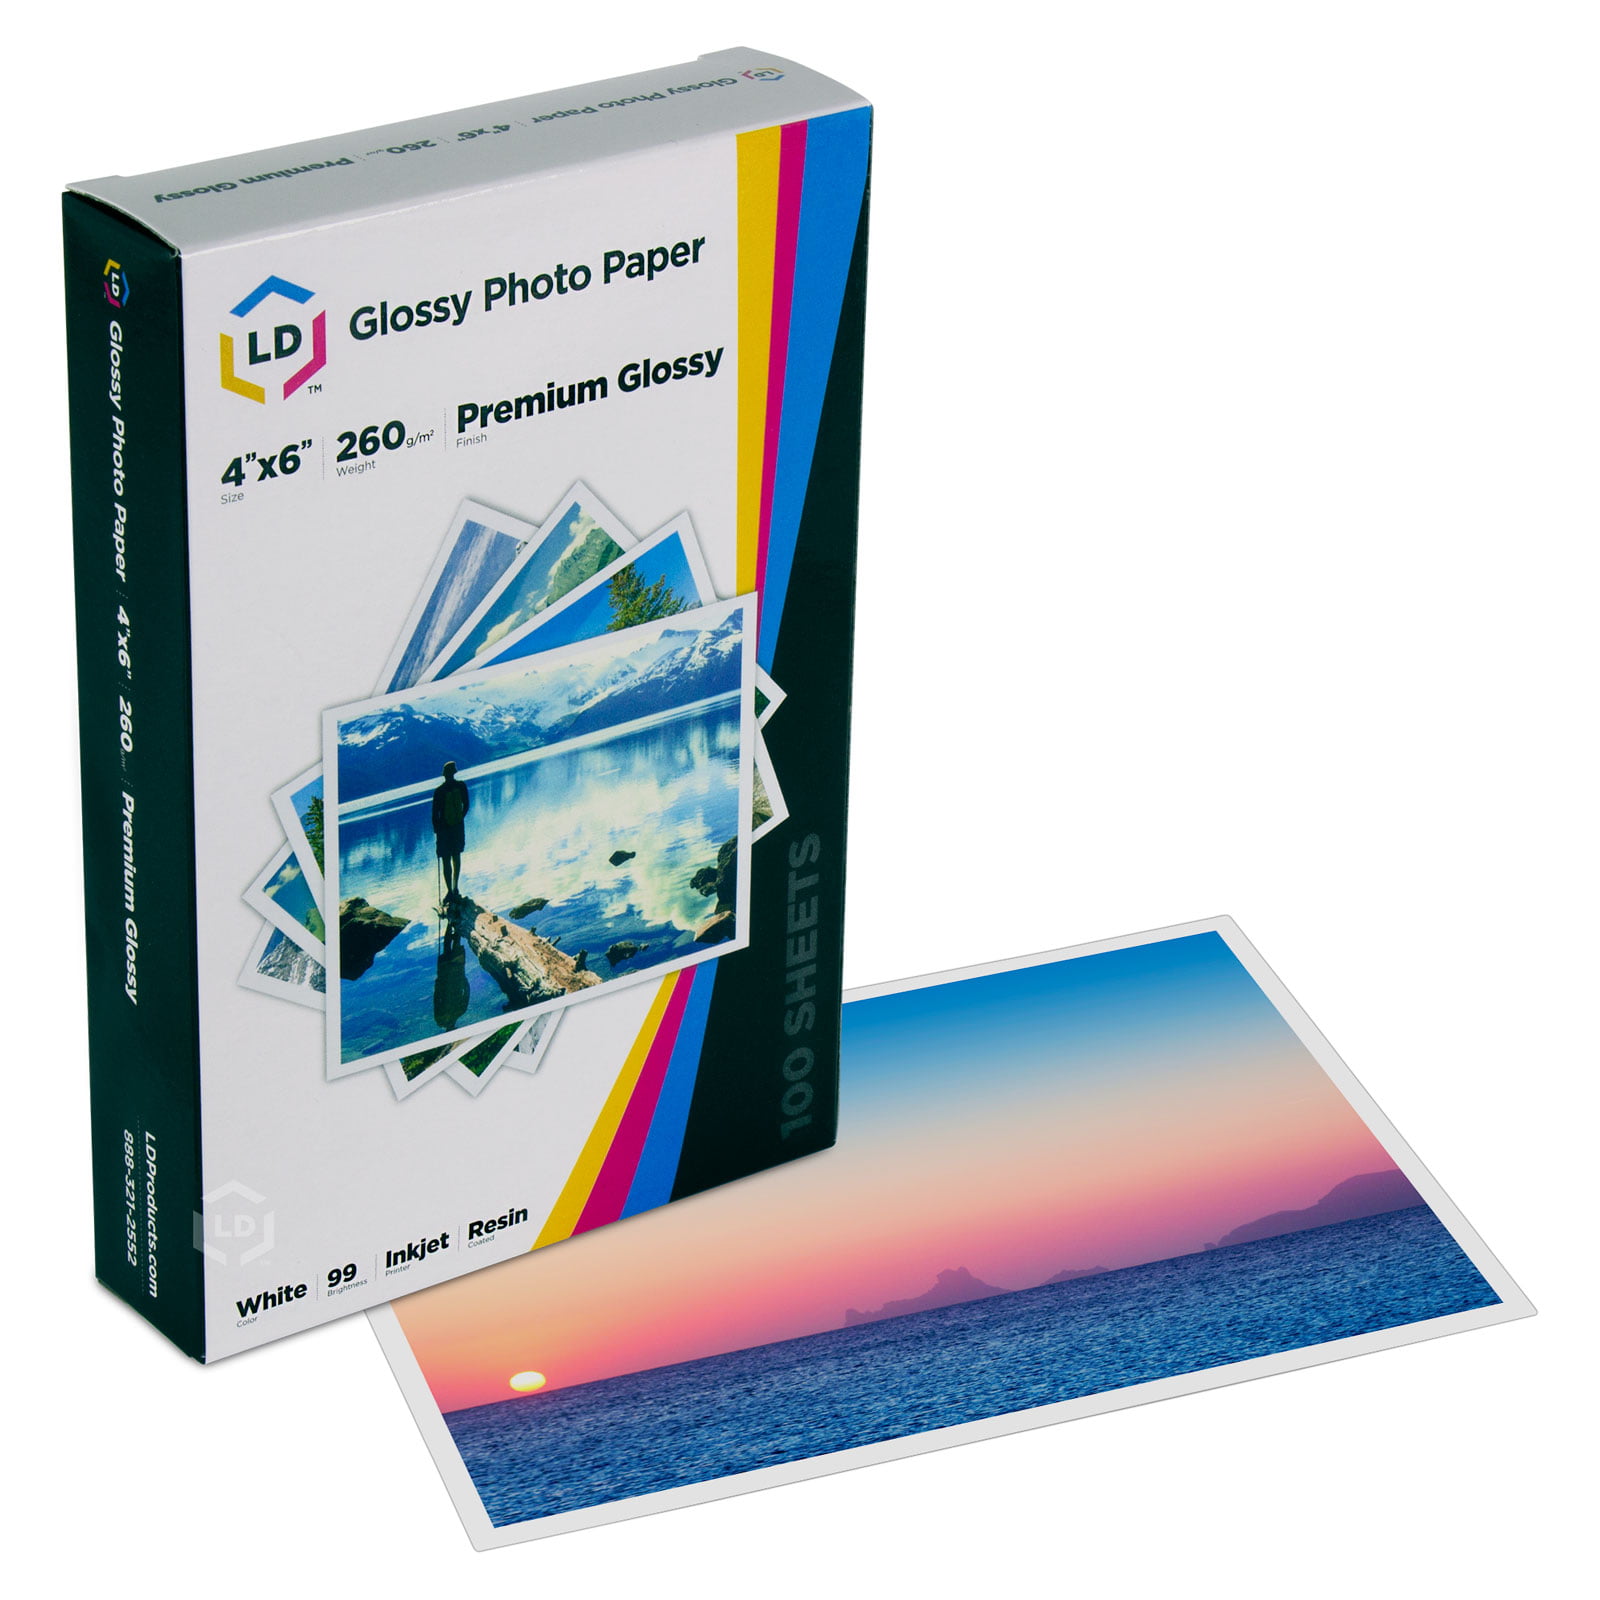 Details about    NEW CANON PP-301 PHOTO PAPER PLUS GLOSSY II INKJET PAPER 100 sheets 